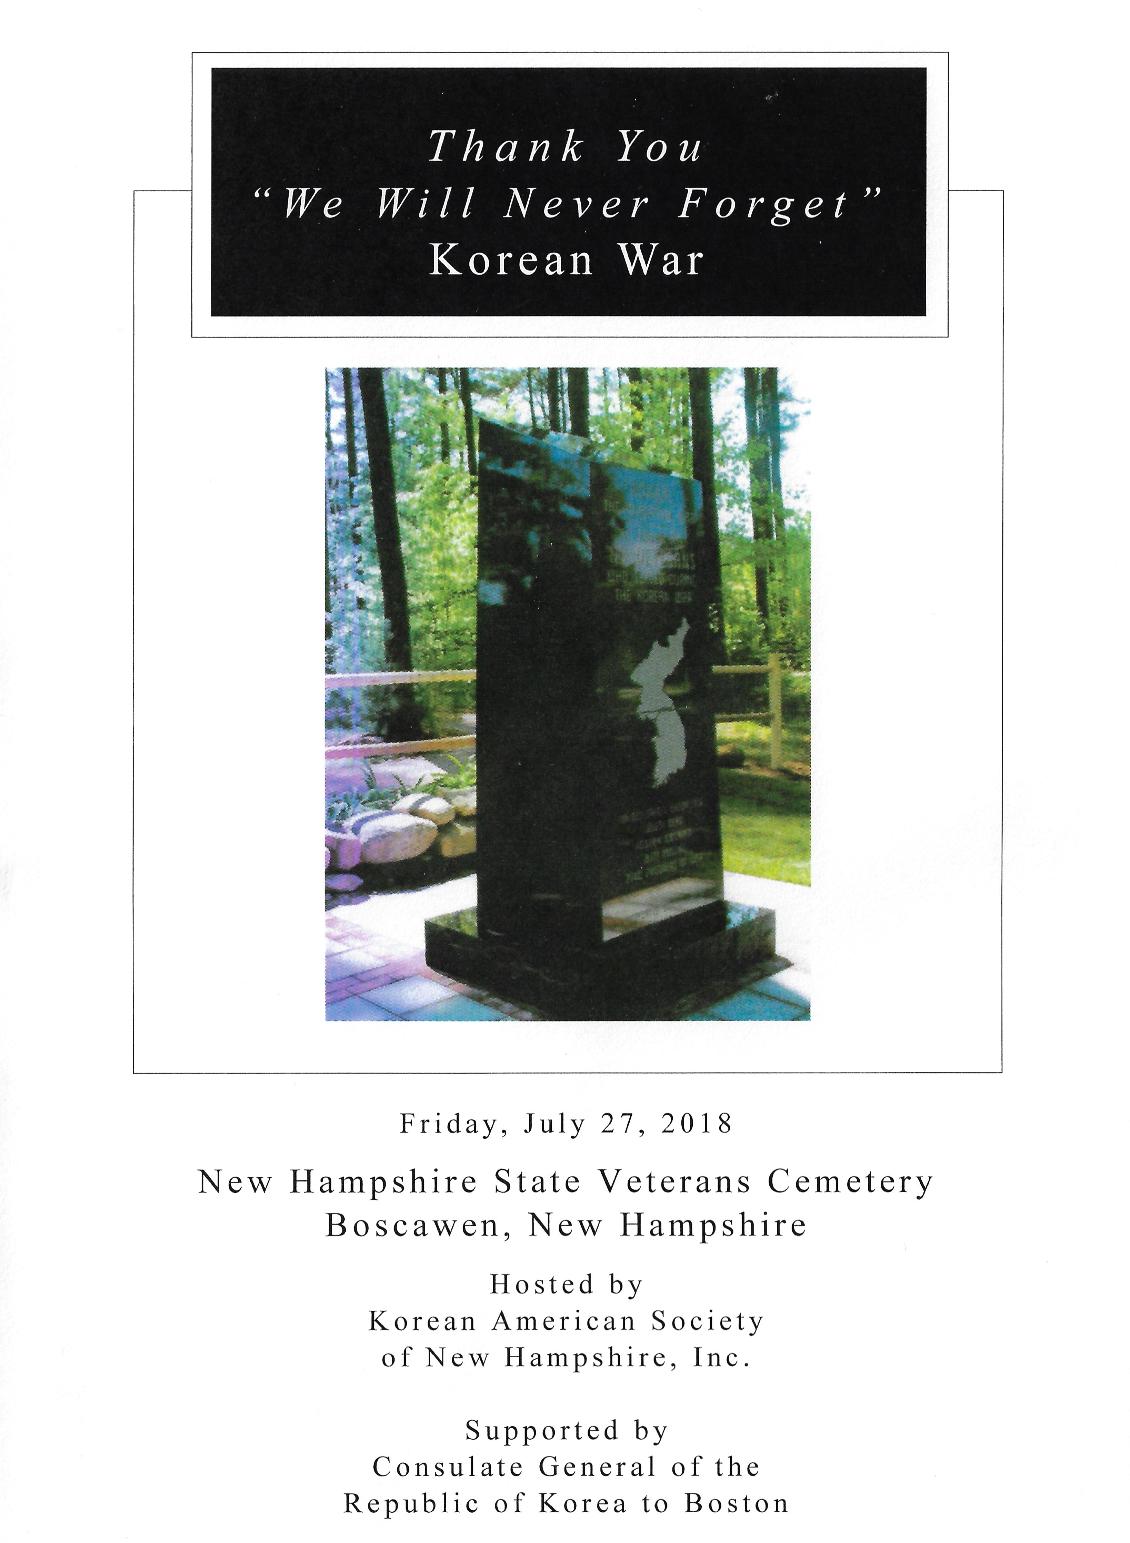 Korean War Remembrance Day NH State Veterans Cemetery July 27th 2018